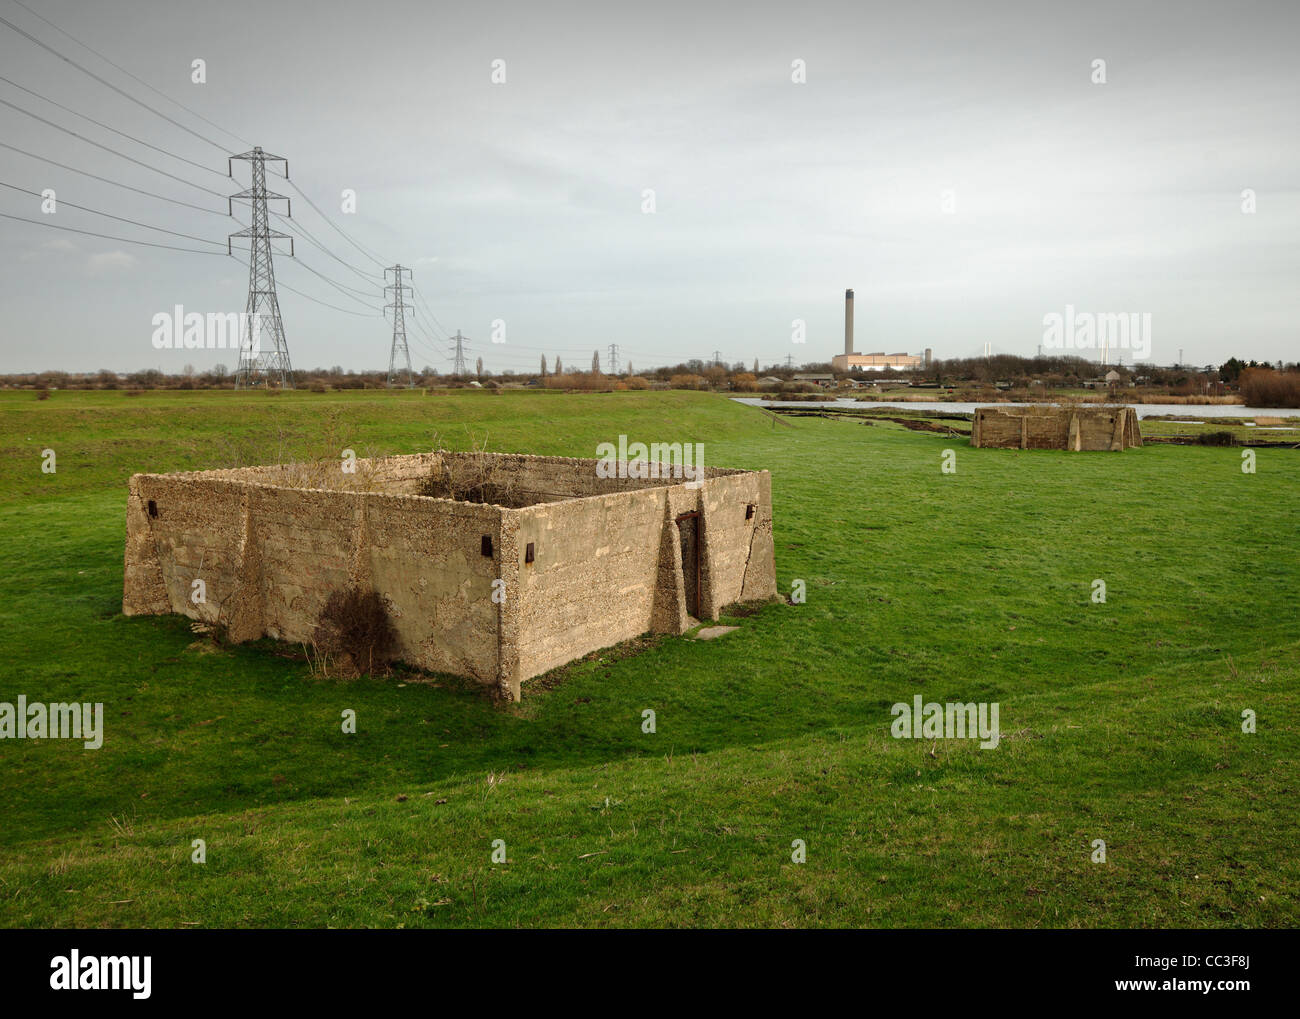 Remains of the Vickers Ammunition storage bunkers on Dartford Salt Marsh dating to around 1911. Stock Photo